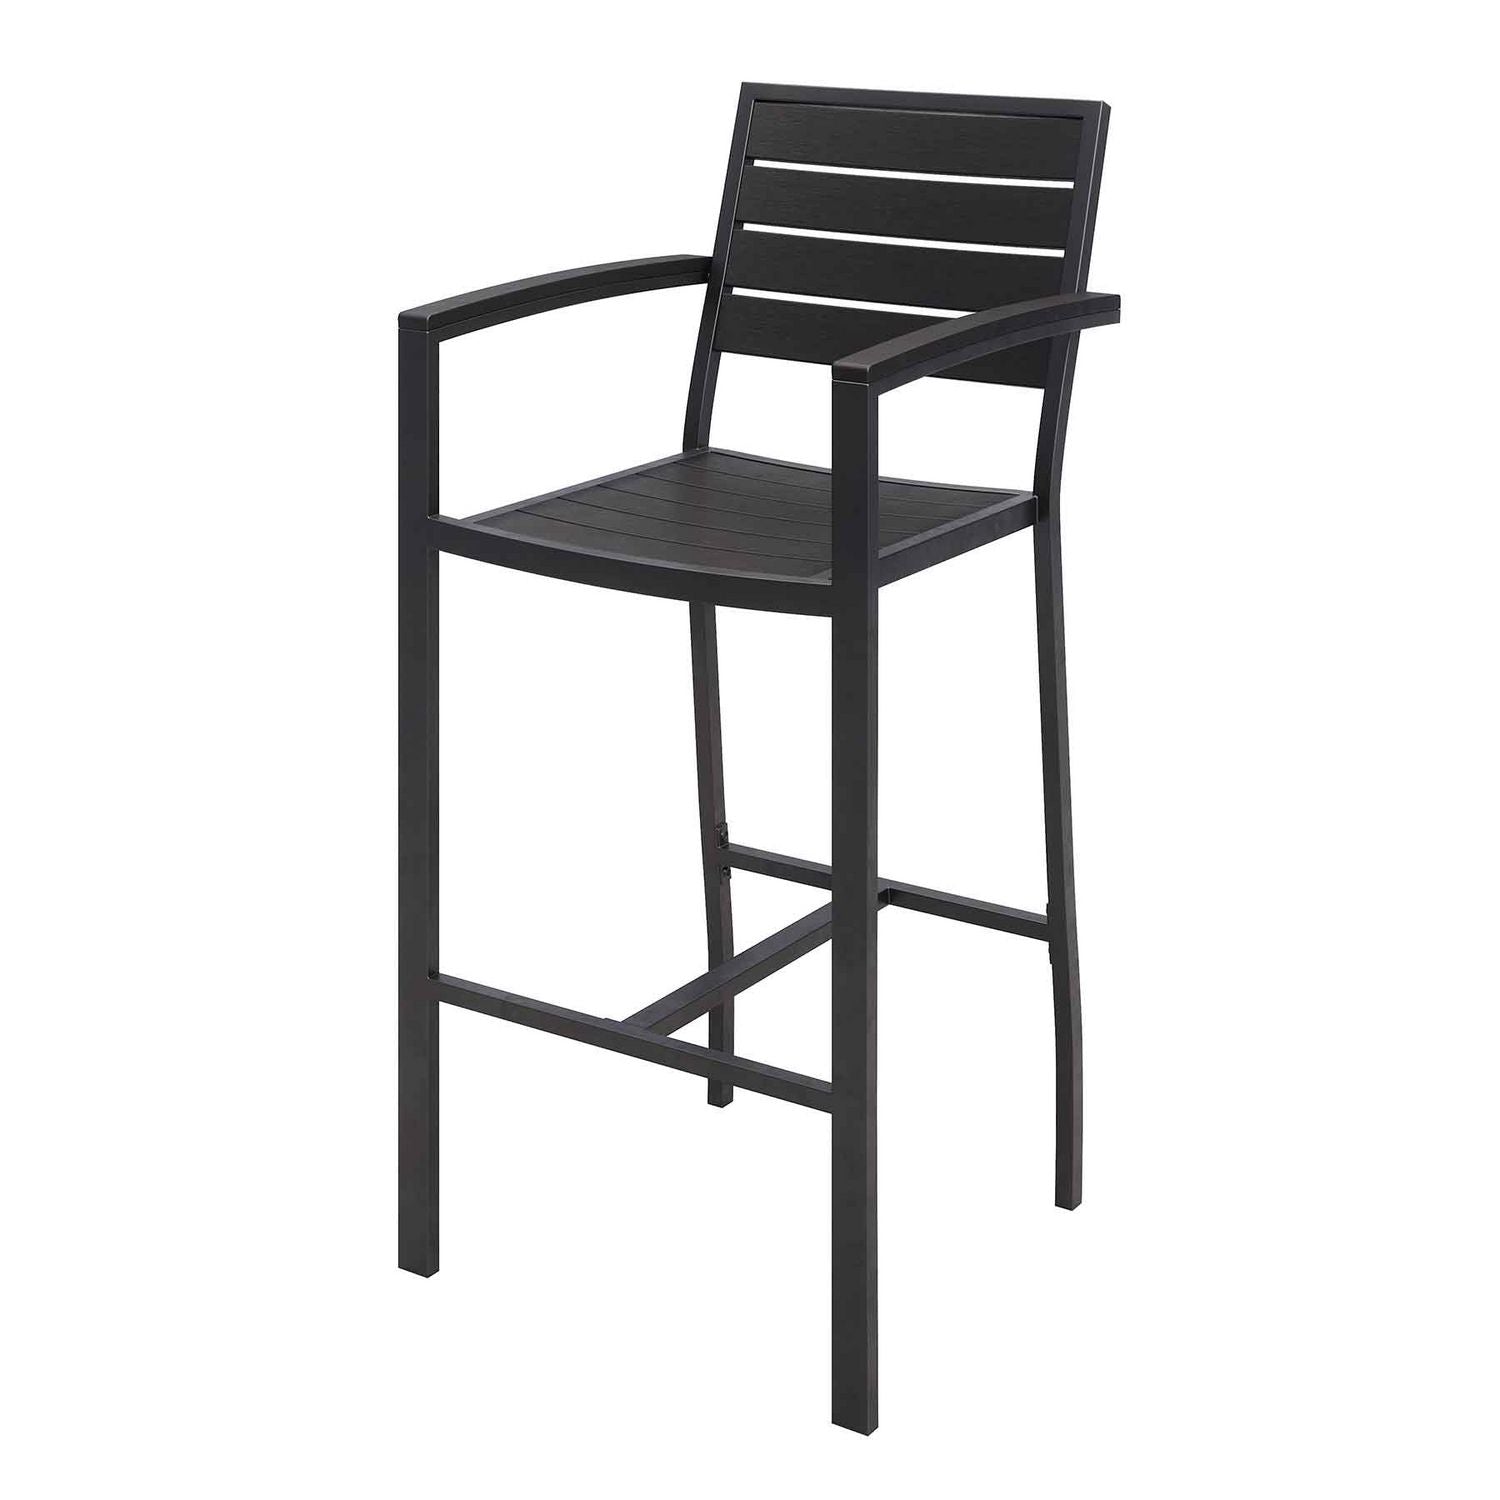 eveleen-outdoor-bistro-patio-table-with-four-black-powder-coated-polymer-barstools-32-x-55-black-ships-in-4-6-bus-days_kfi840031925213 - 3